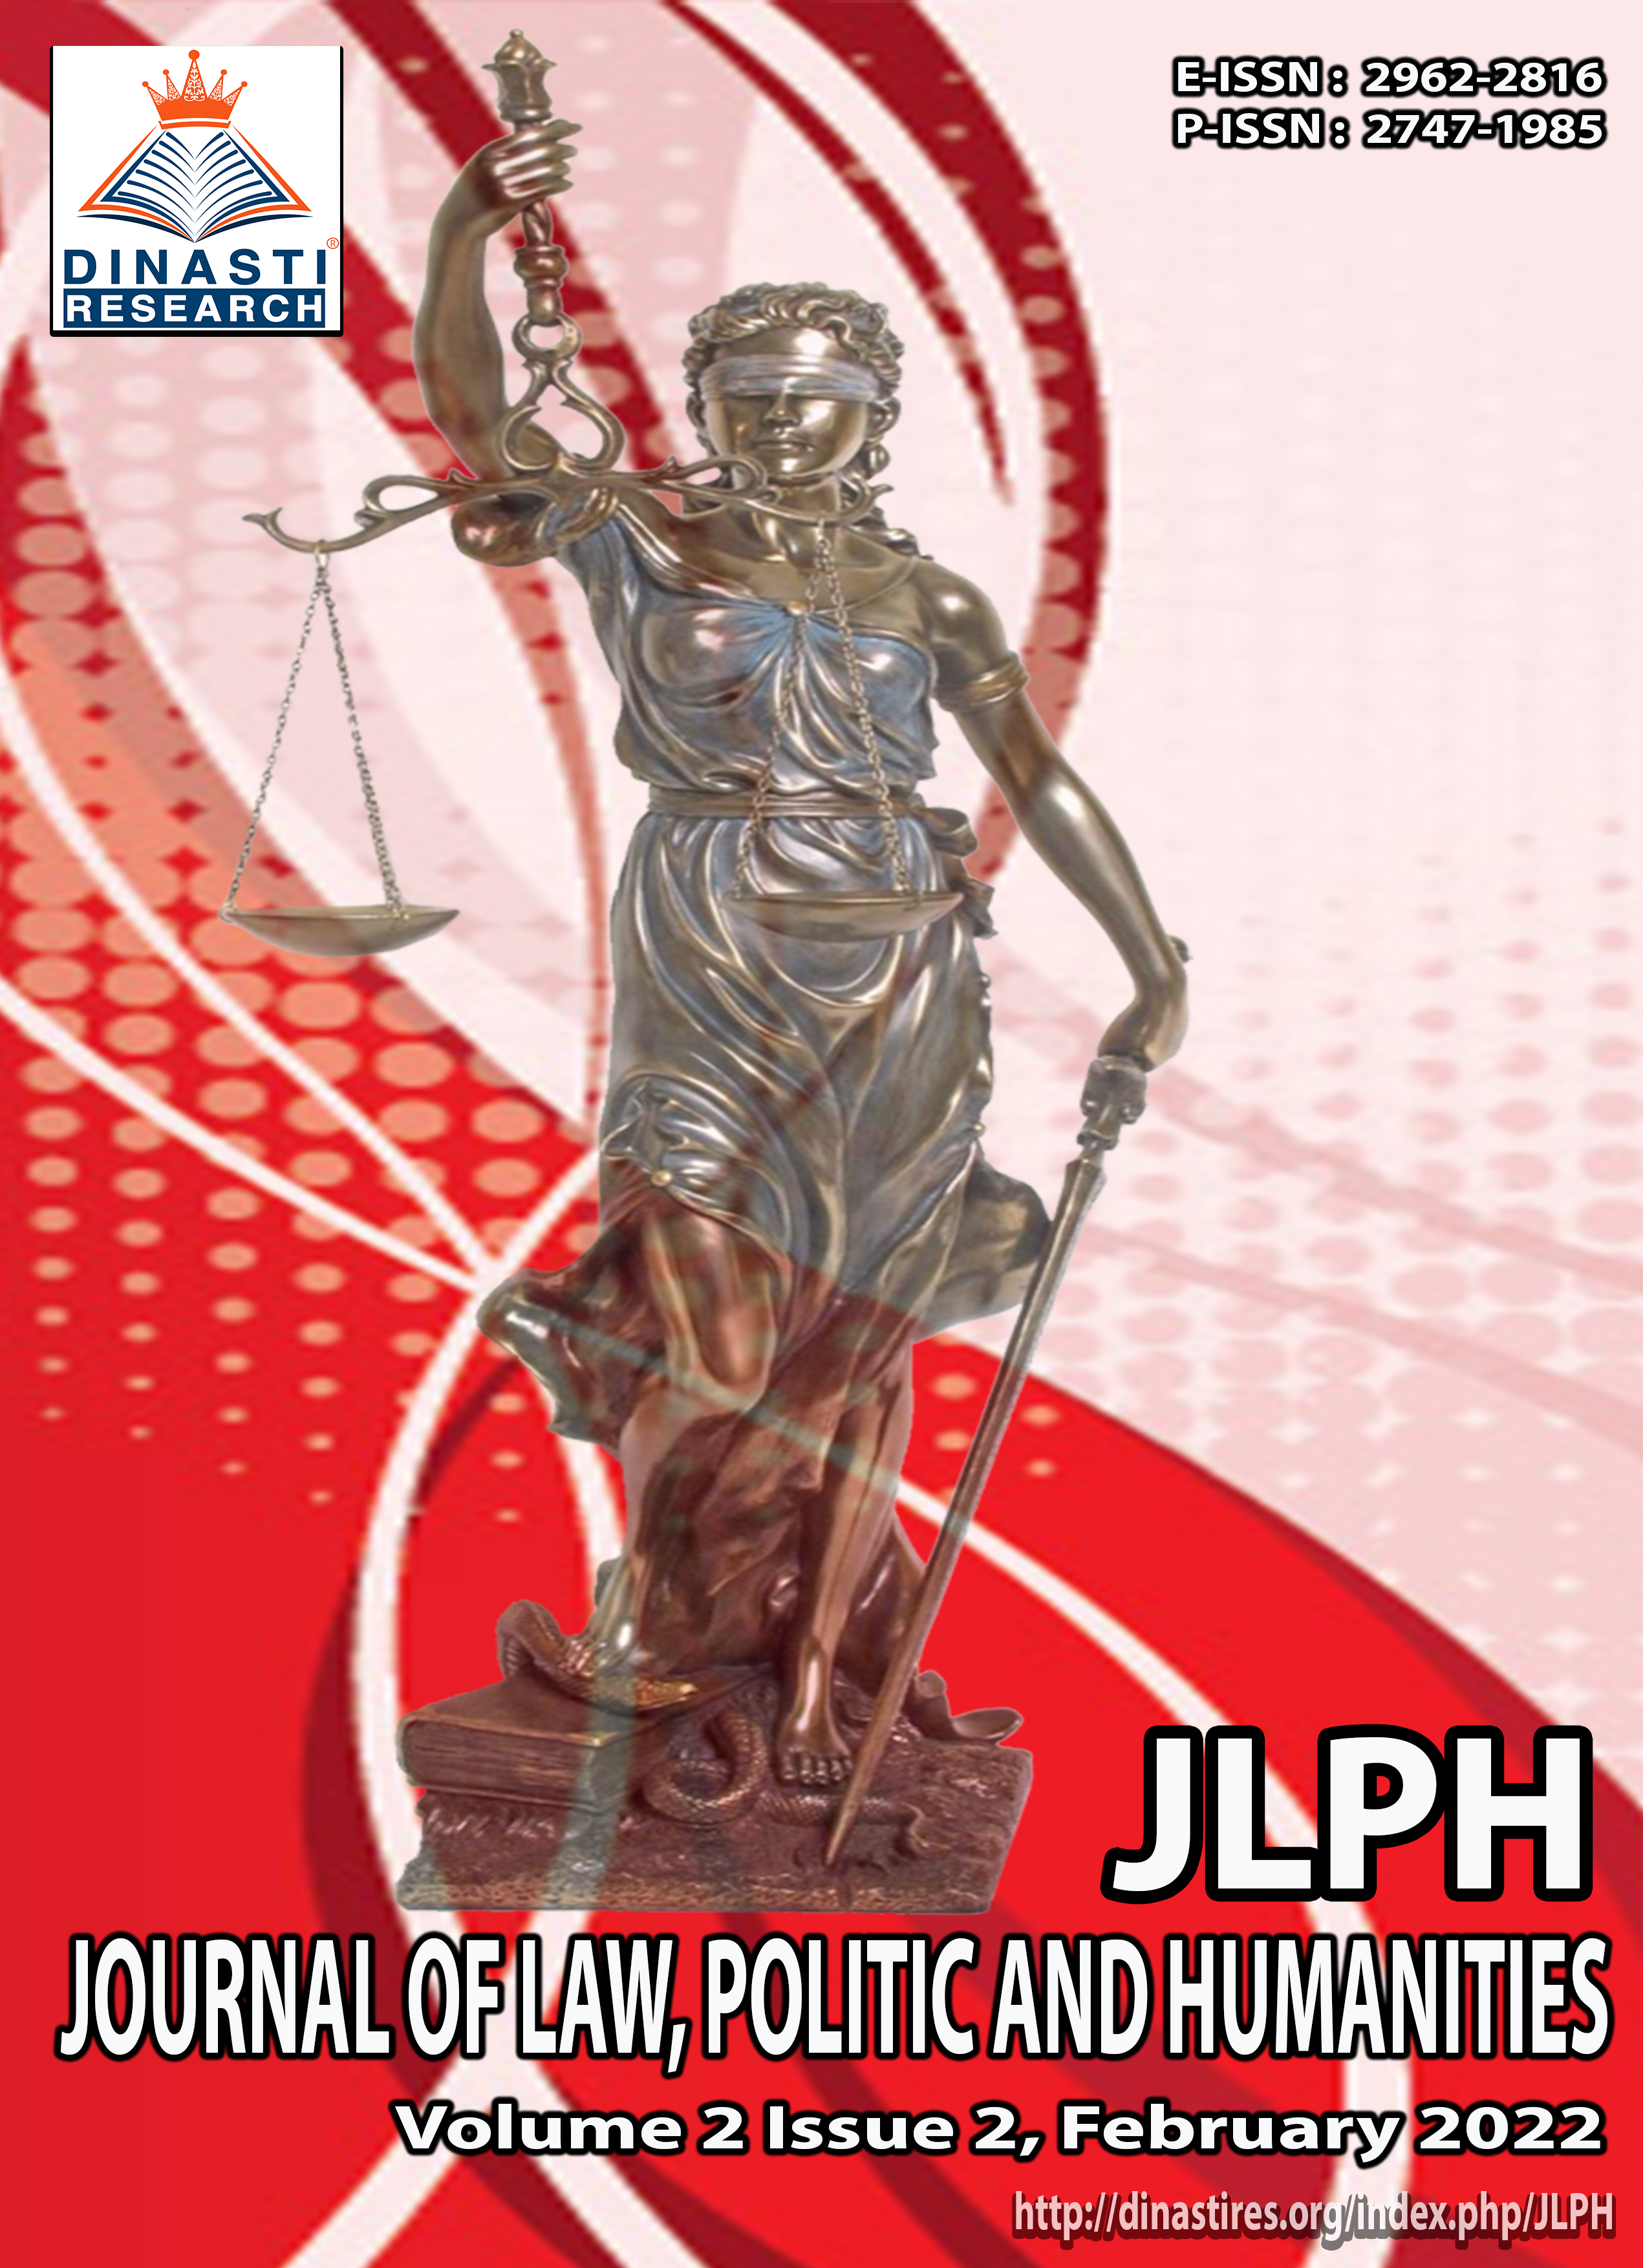 					View Vol. 2 No. 2 (2022): (JLPH) Journal of Law, Politic and Humanities (February 2022)
				